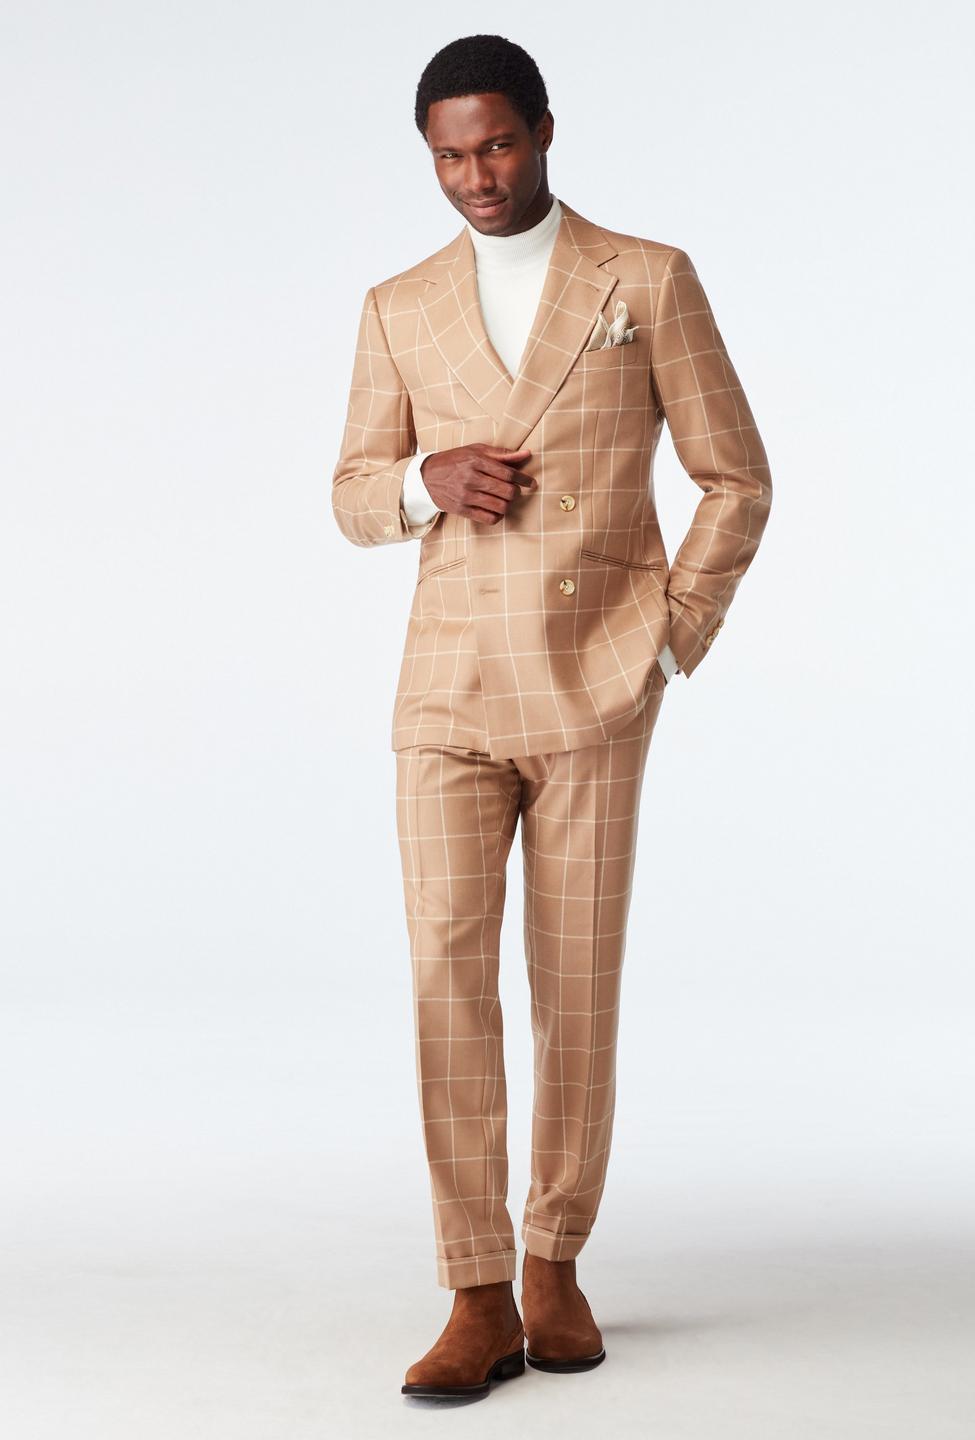 Camel suit - Durham Checked Design from Seasonal Indochino Collection